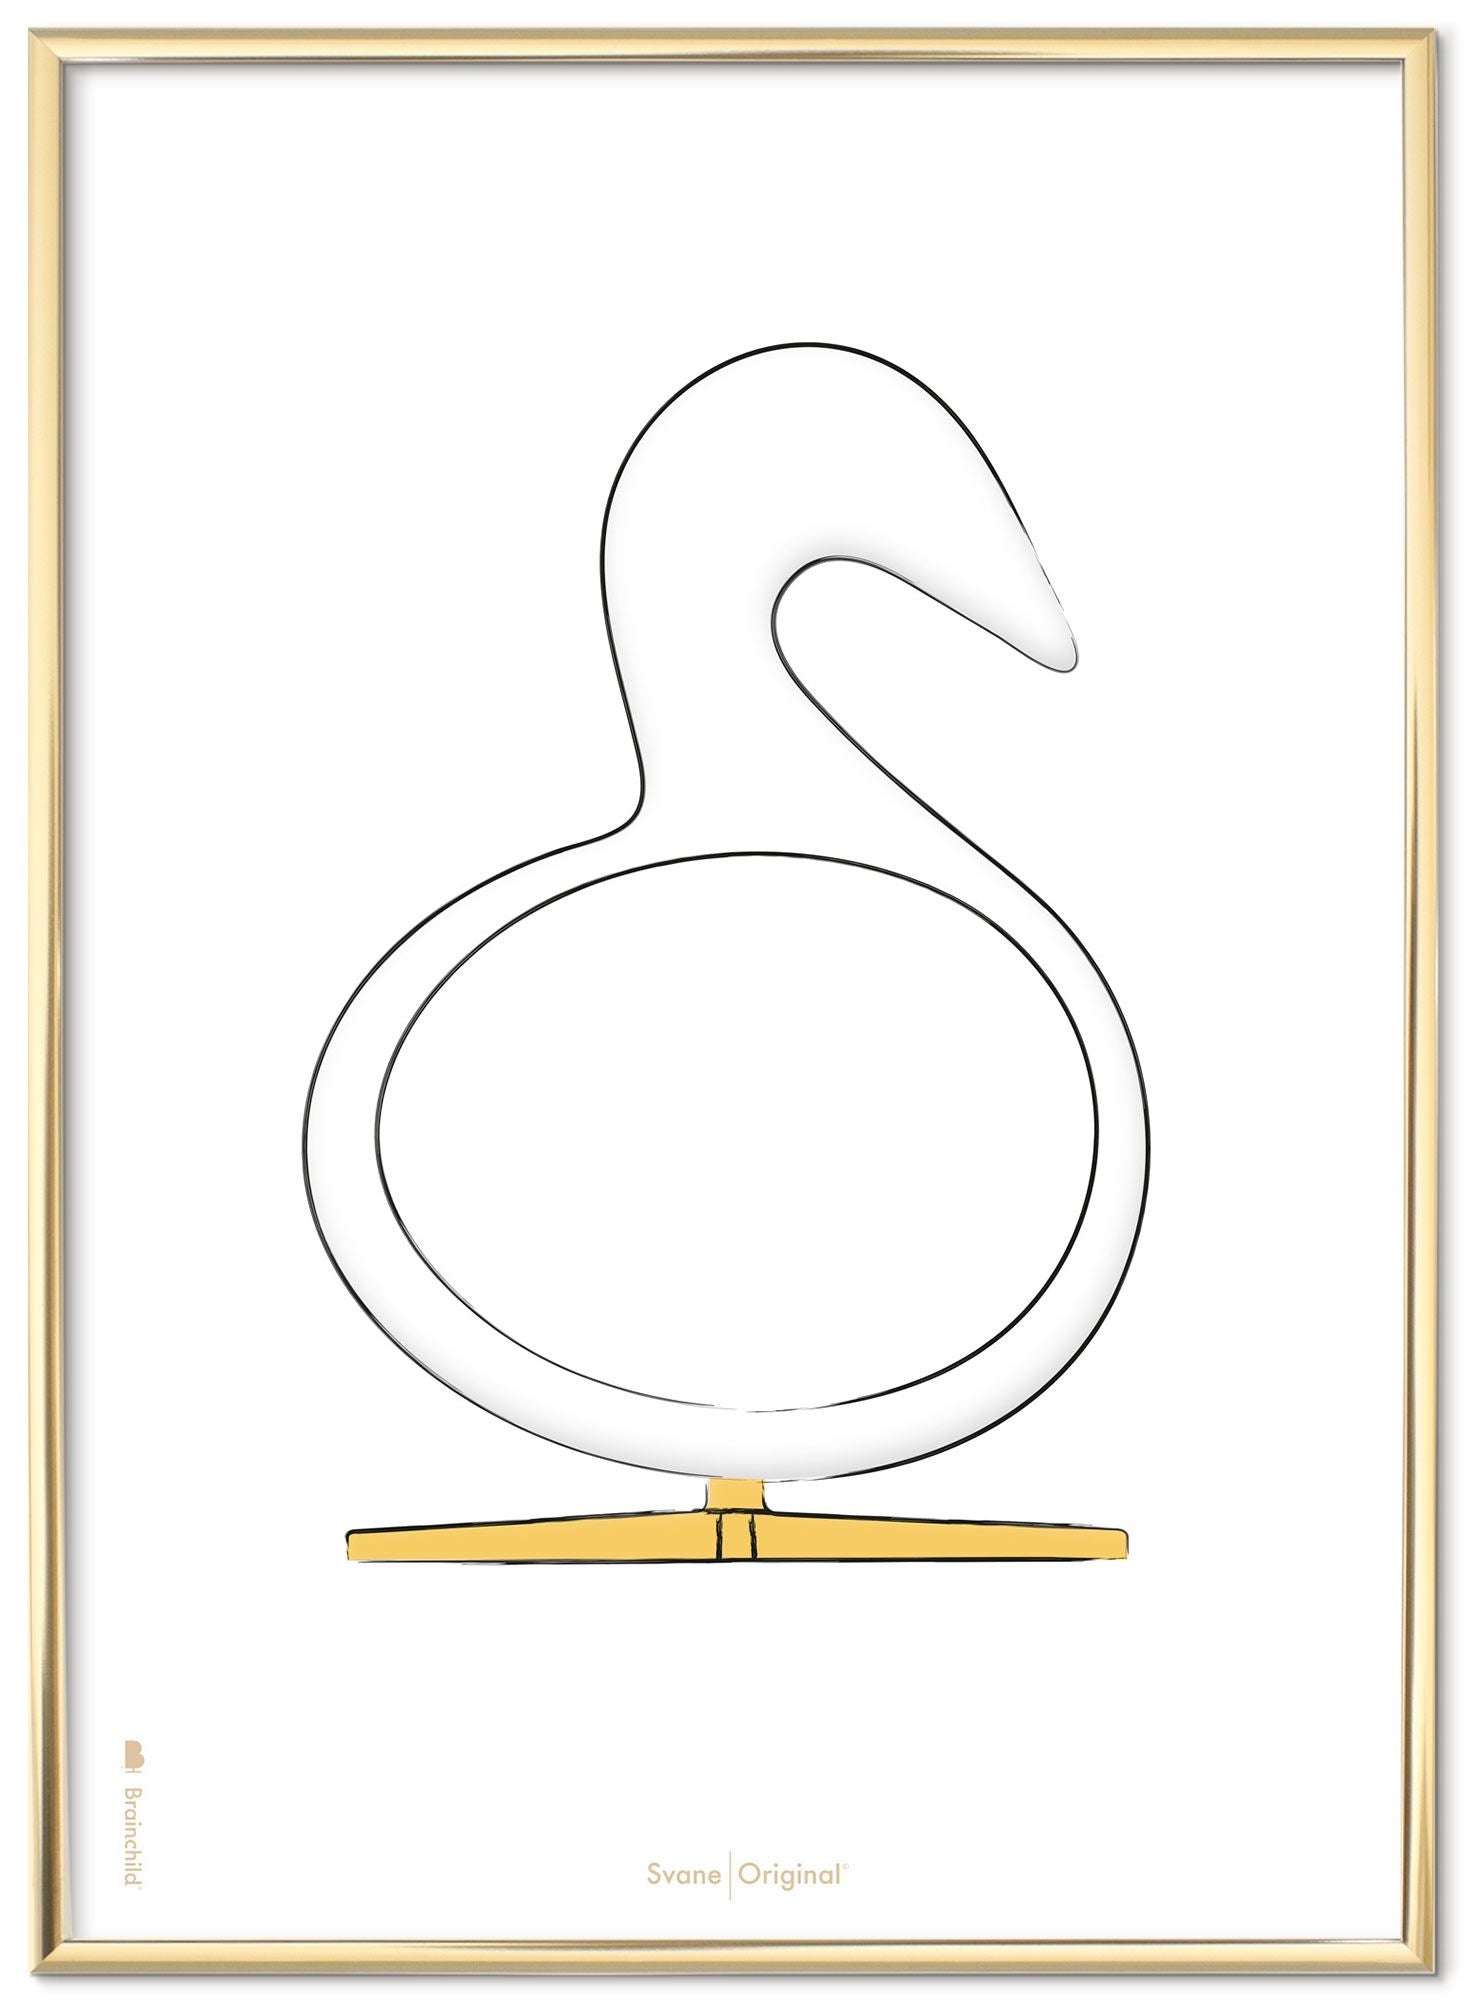 Brainchild Swan Design Sketch Poster Frame Made Of Brass Colored Metal 70x100 Cm, White Background